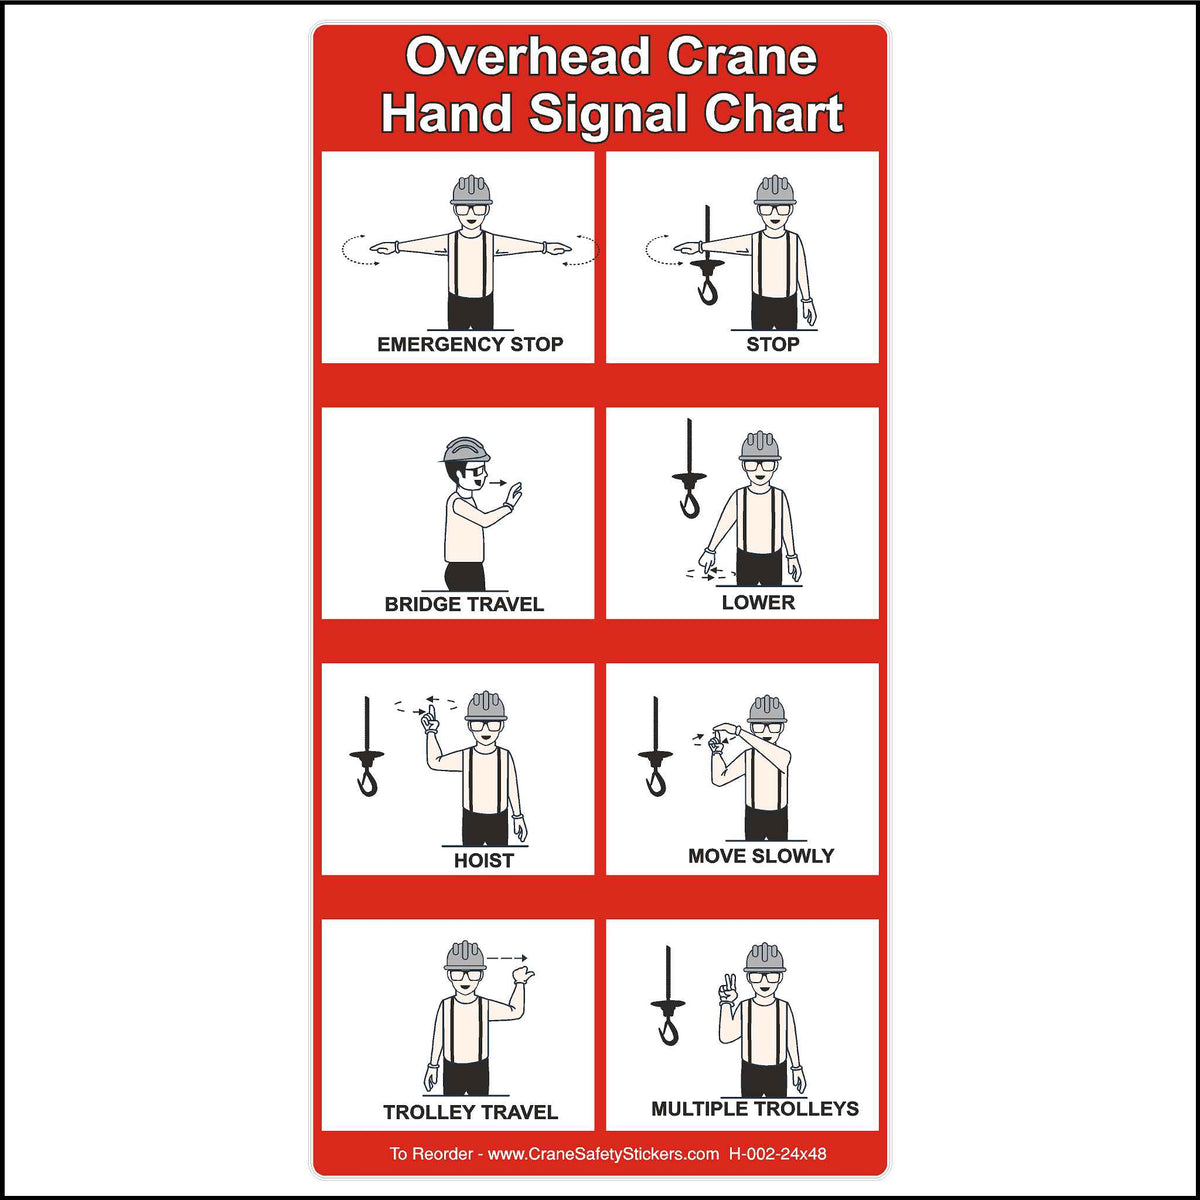 Overhead Crane Hand Signal Chart with all hand signals. 24 inches by 48 inches in size.